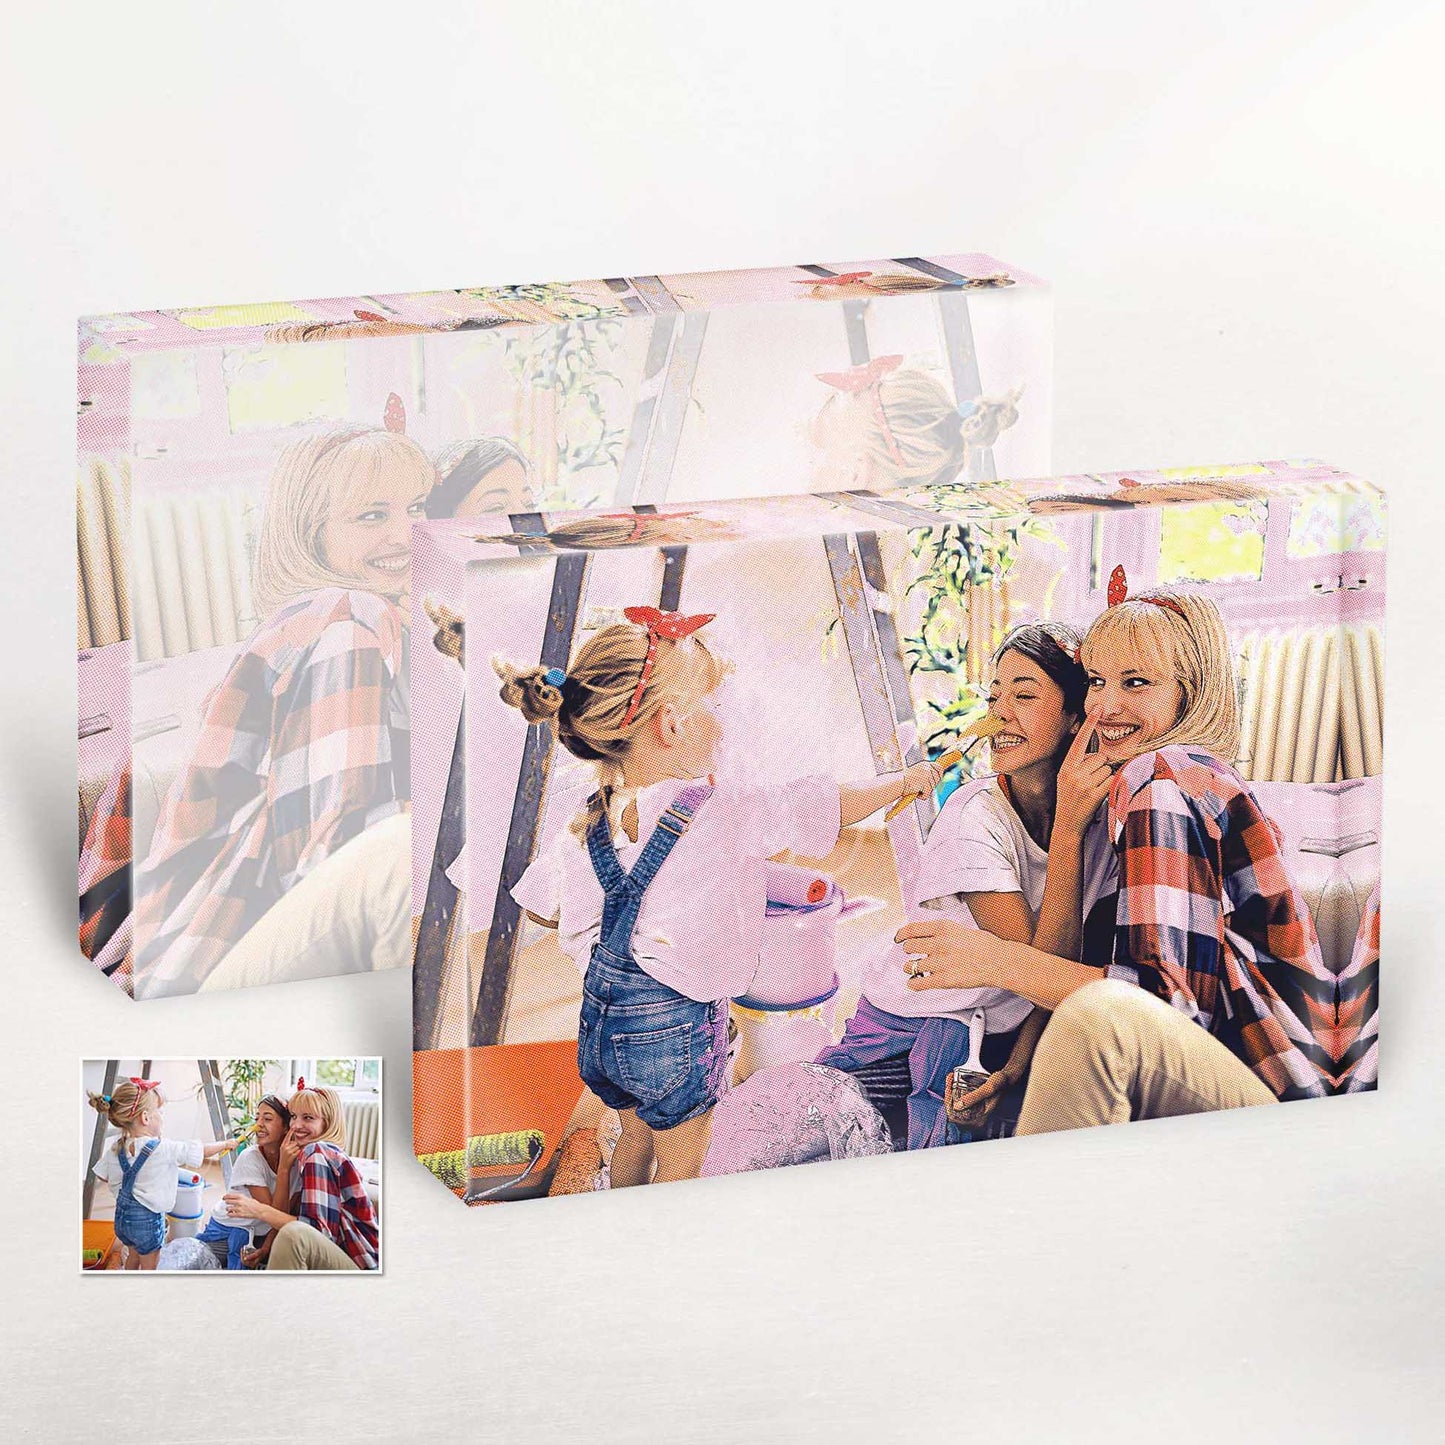 Relive the good old days with our Personalised Retro Cartoon Filter Acrylic Block Photo. Its vintage-inspired design adds a fun and whimsical touch to any space, making it an original artwork that transforms your photo into a creative and nostalgic gift.